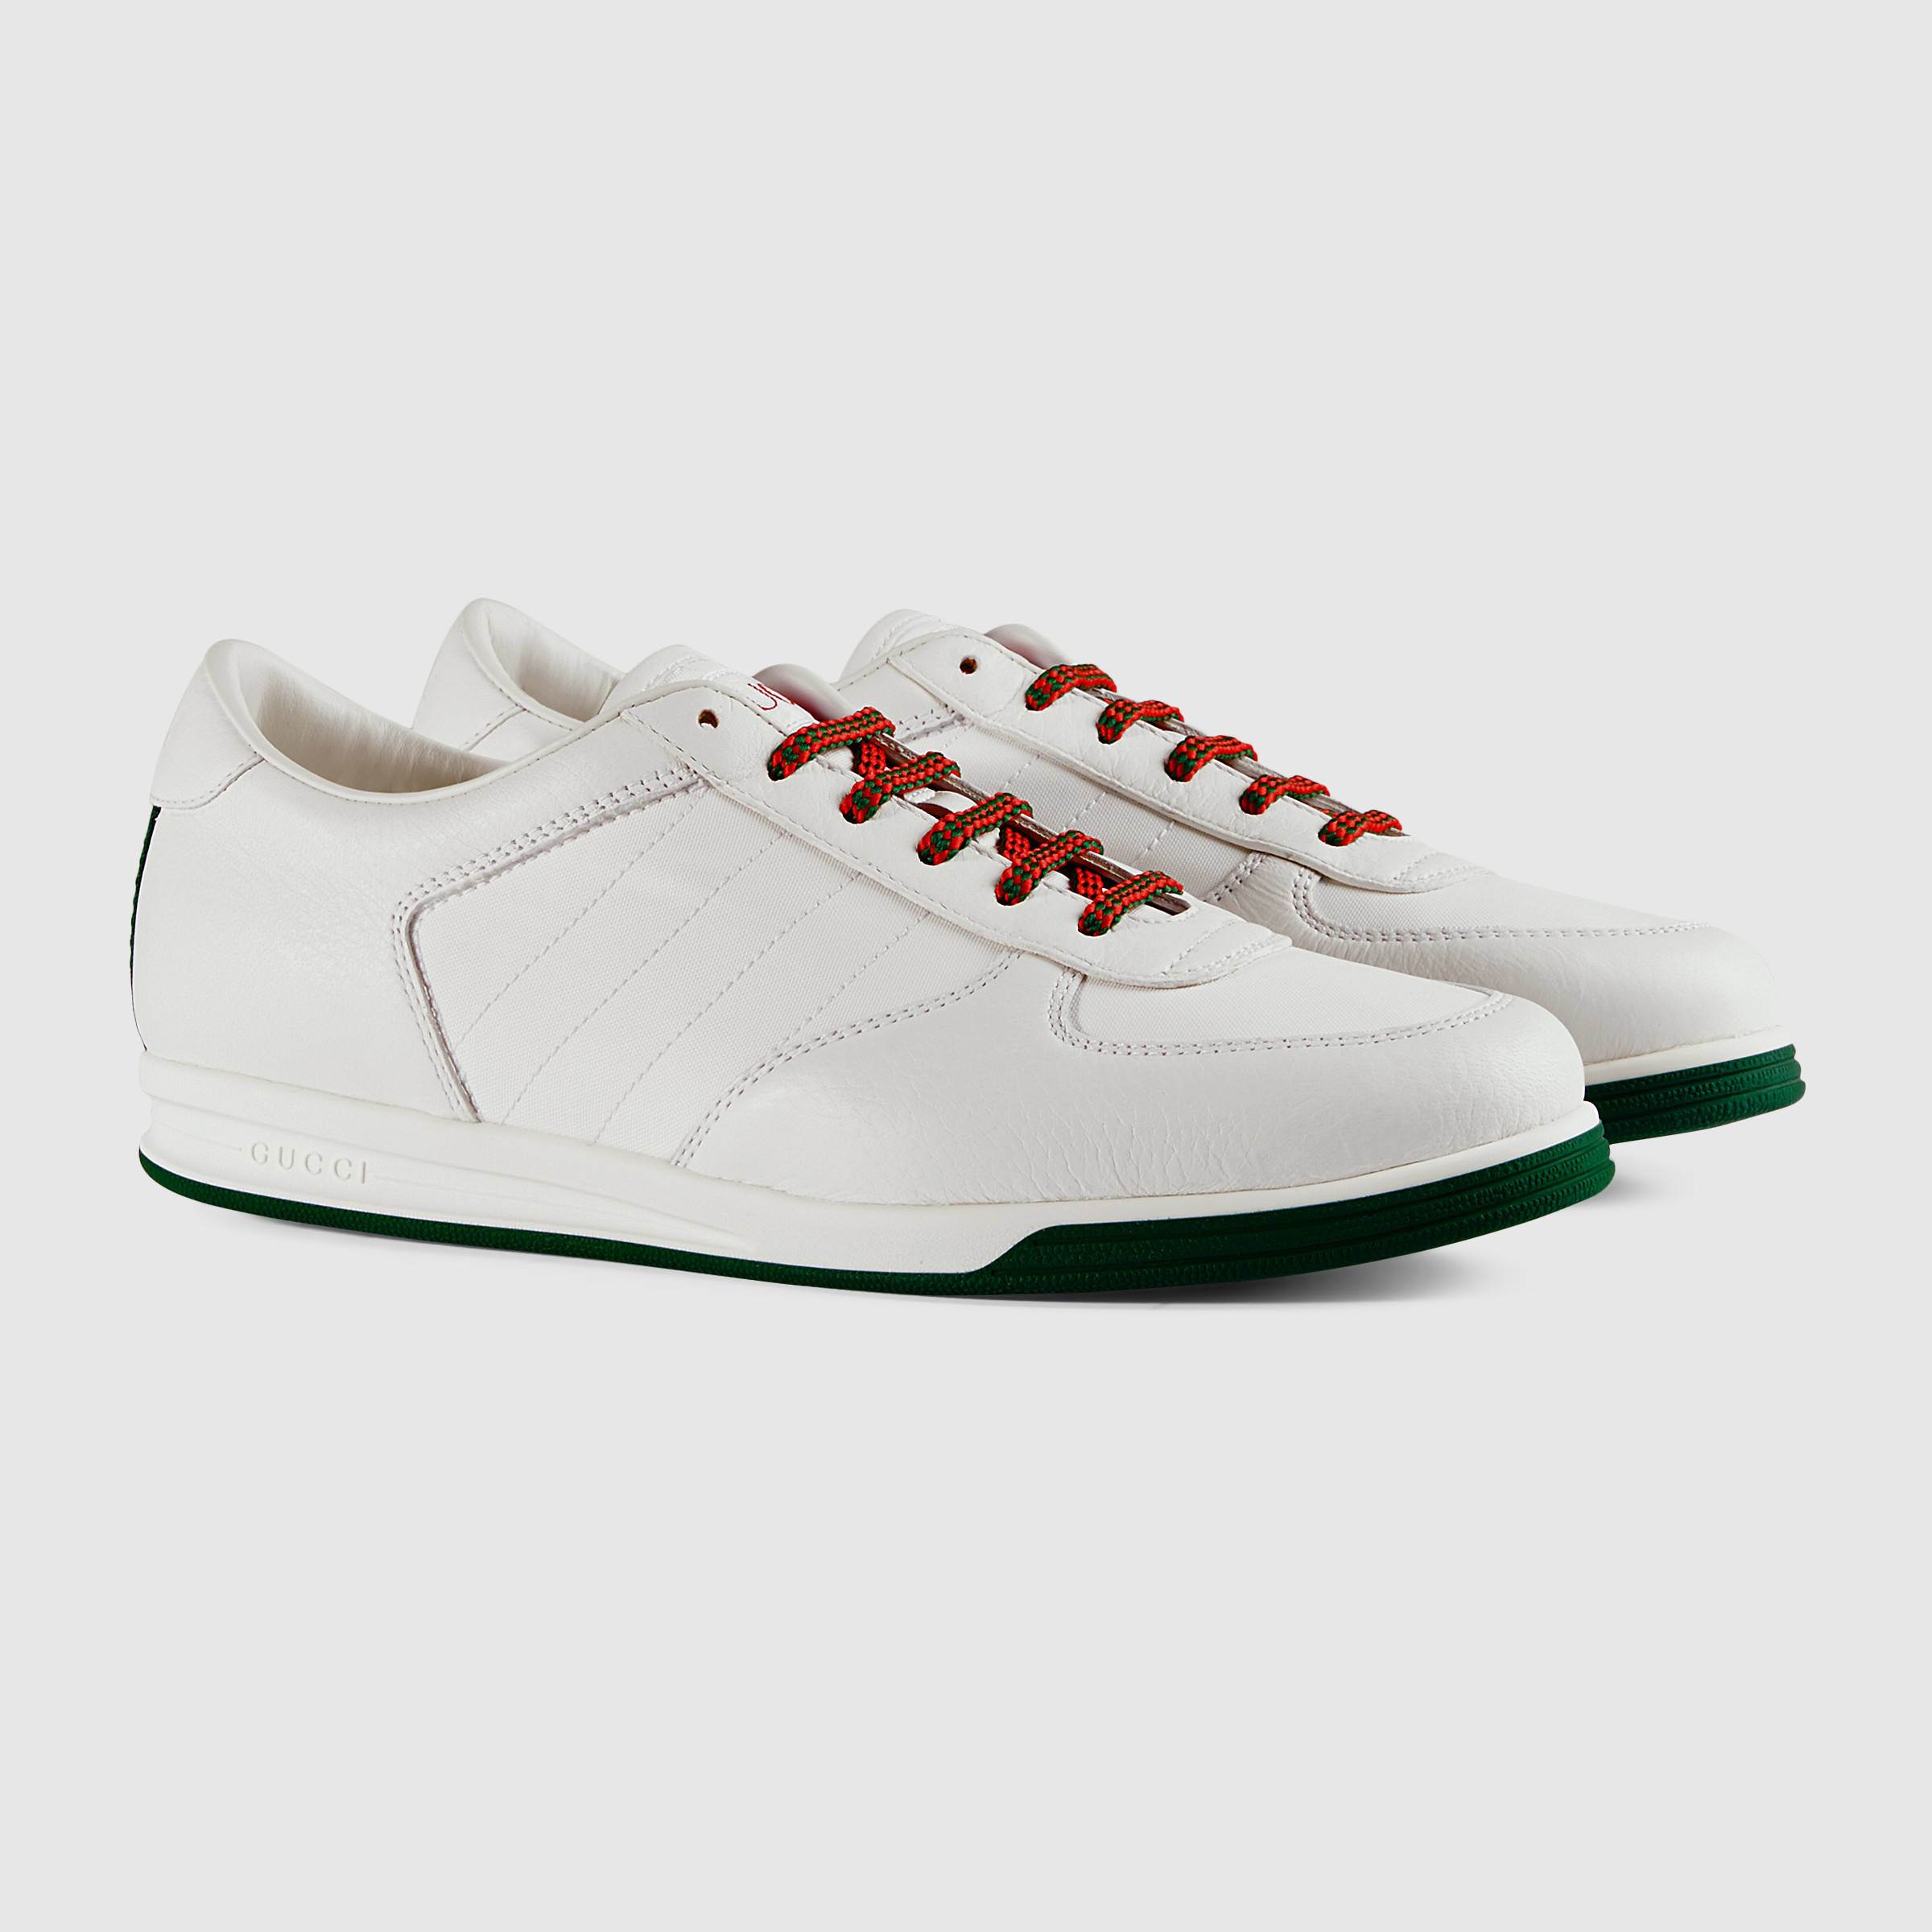 Lyst - Gucci 1984 Low Top Sneaker In Leather in White2400 x 2400